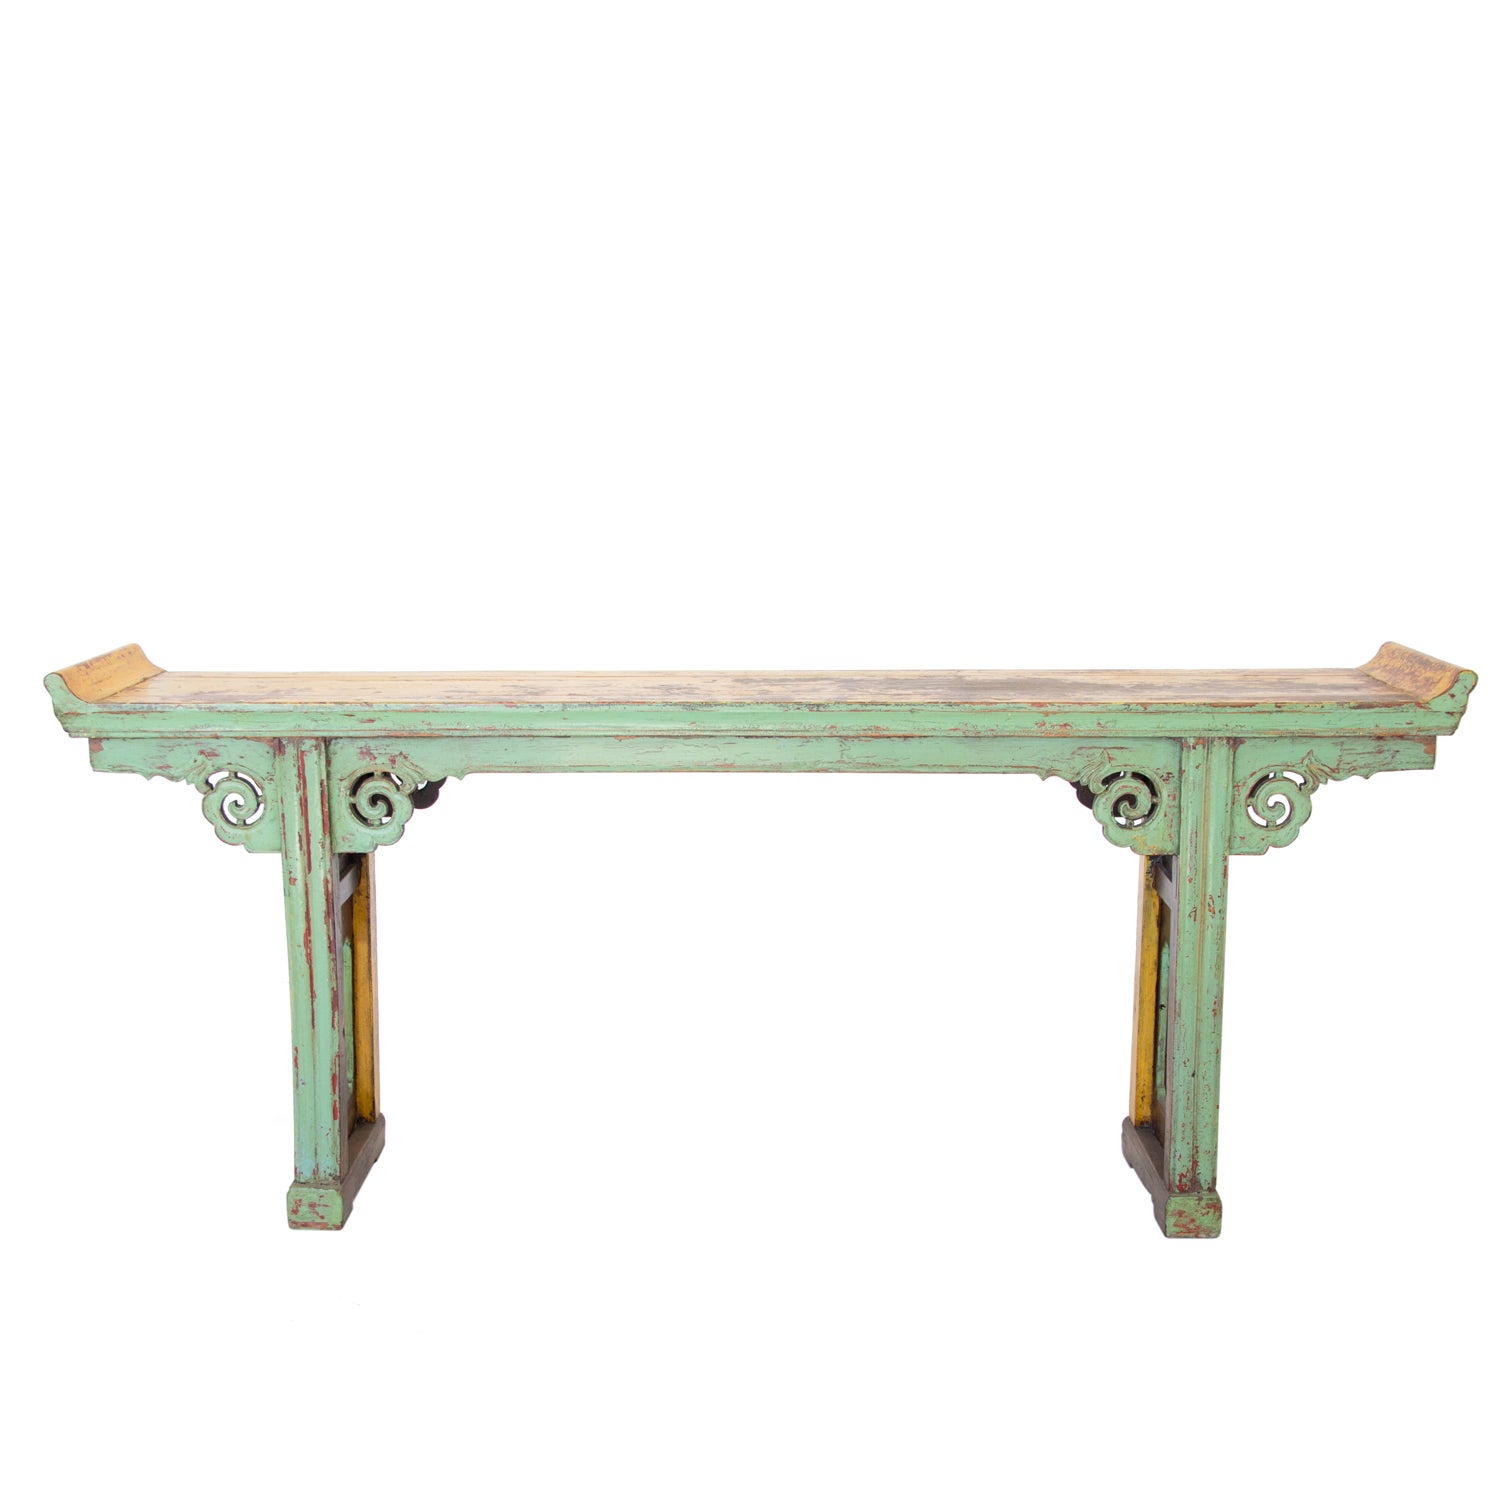 A Wooden Altar Table